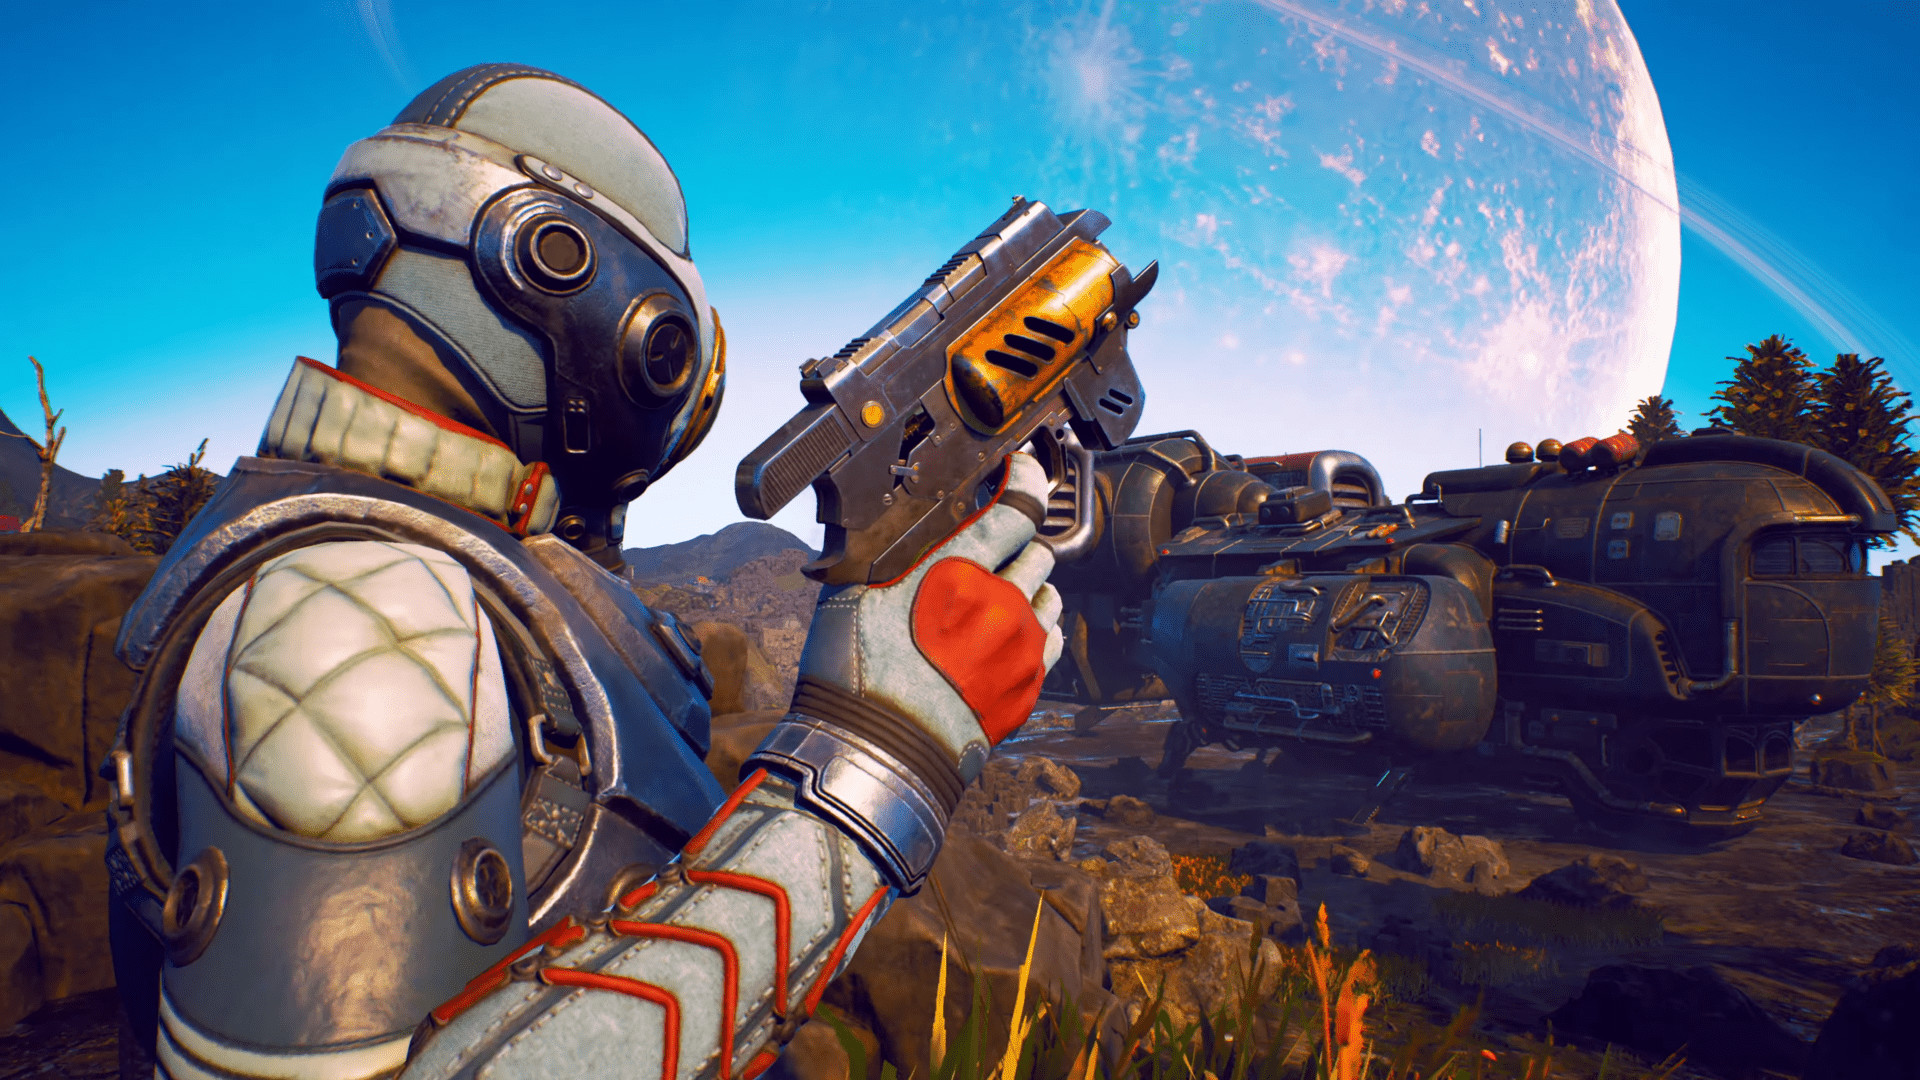 The Outer Worlds E3 trailer